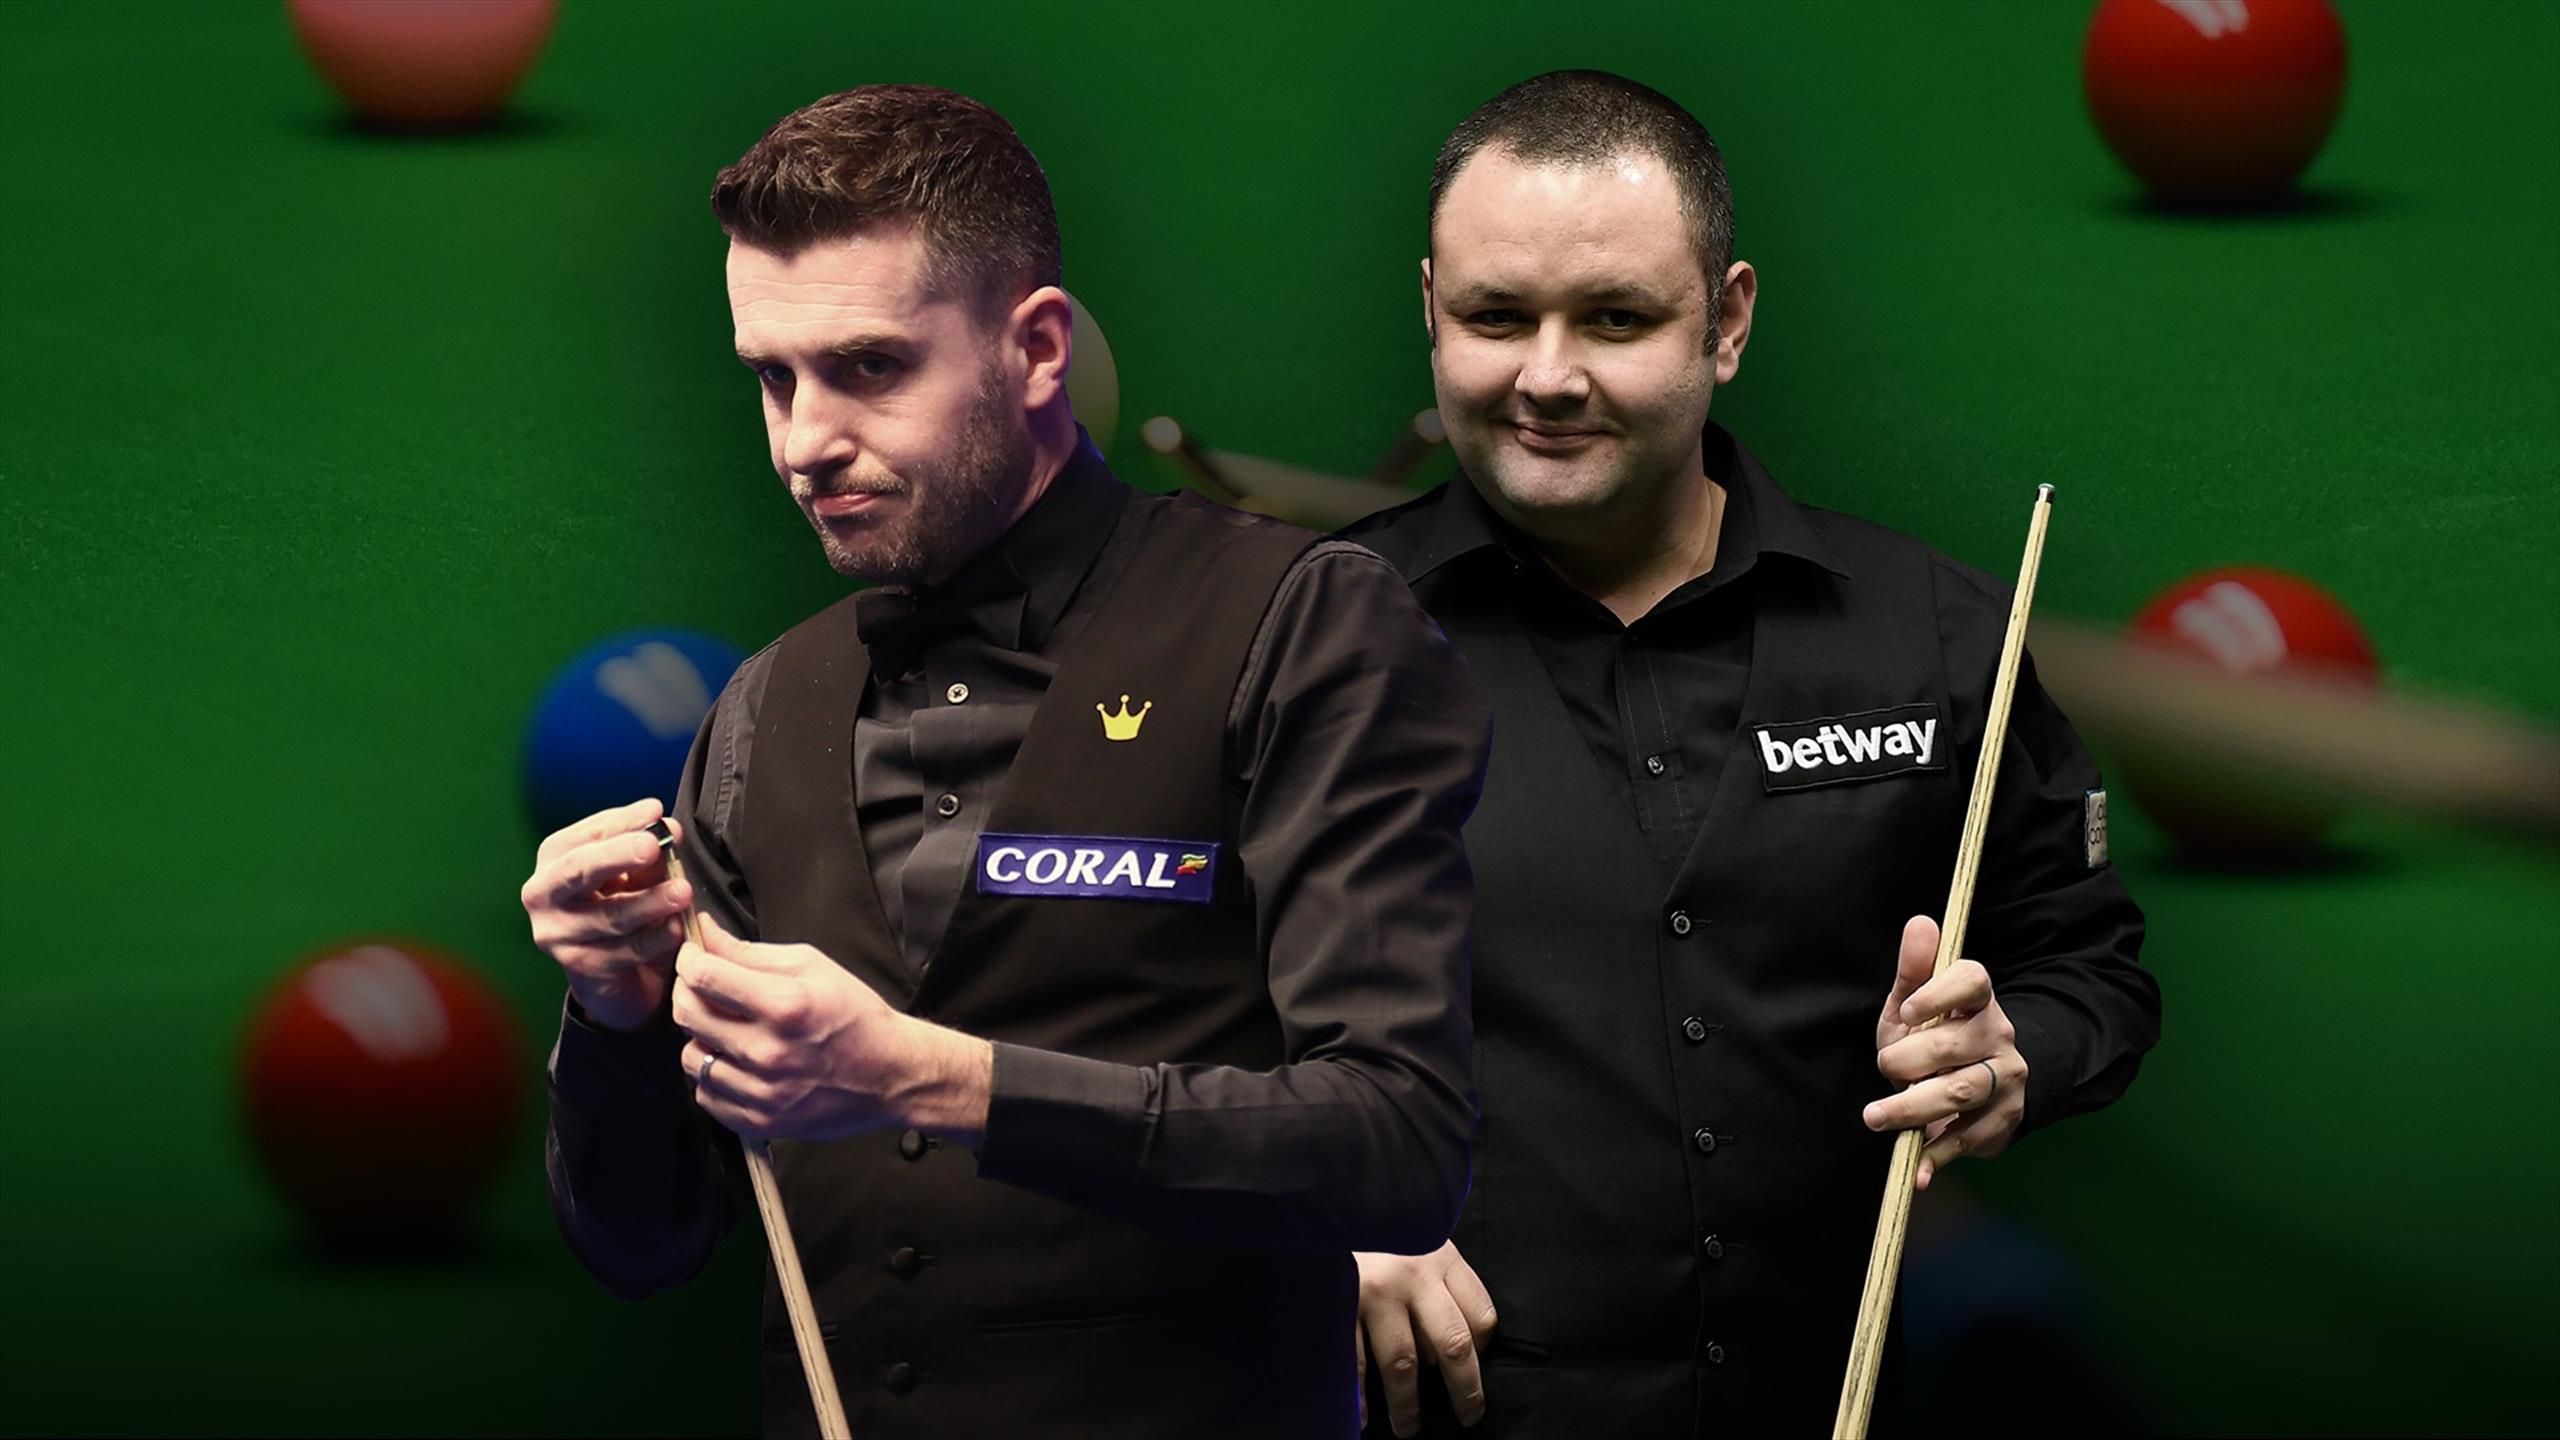 Masters snooker 2021 LIVE updates - Mark Selby in action after Neil Robertson crashes out earlier